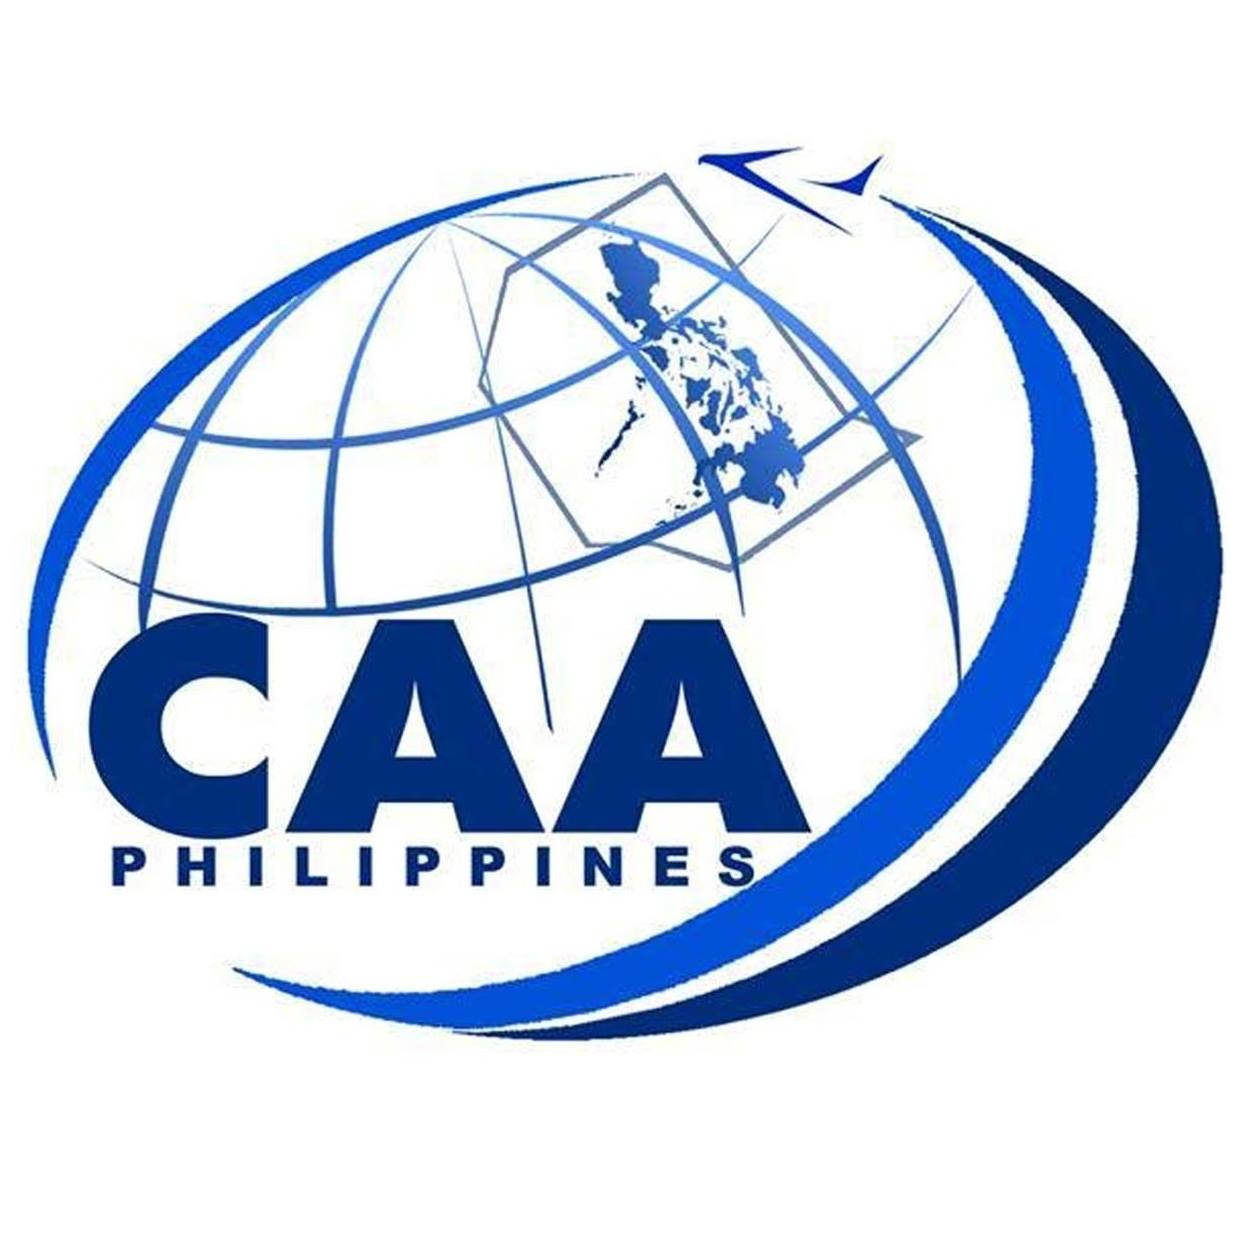 CAAP steps up security in airports as Holy Week nears